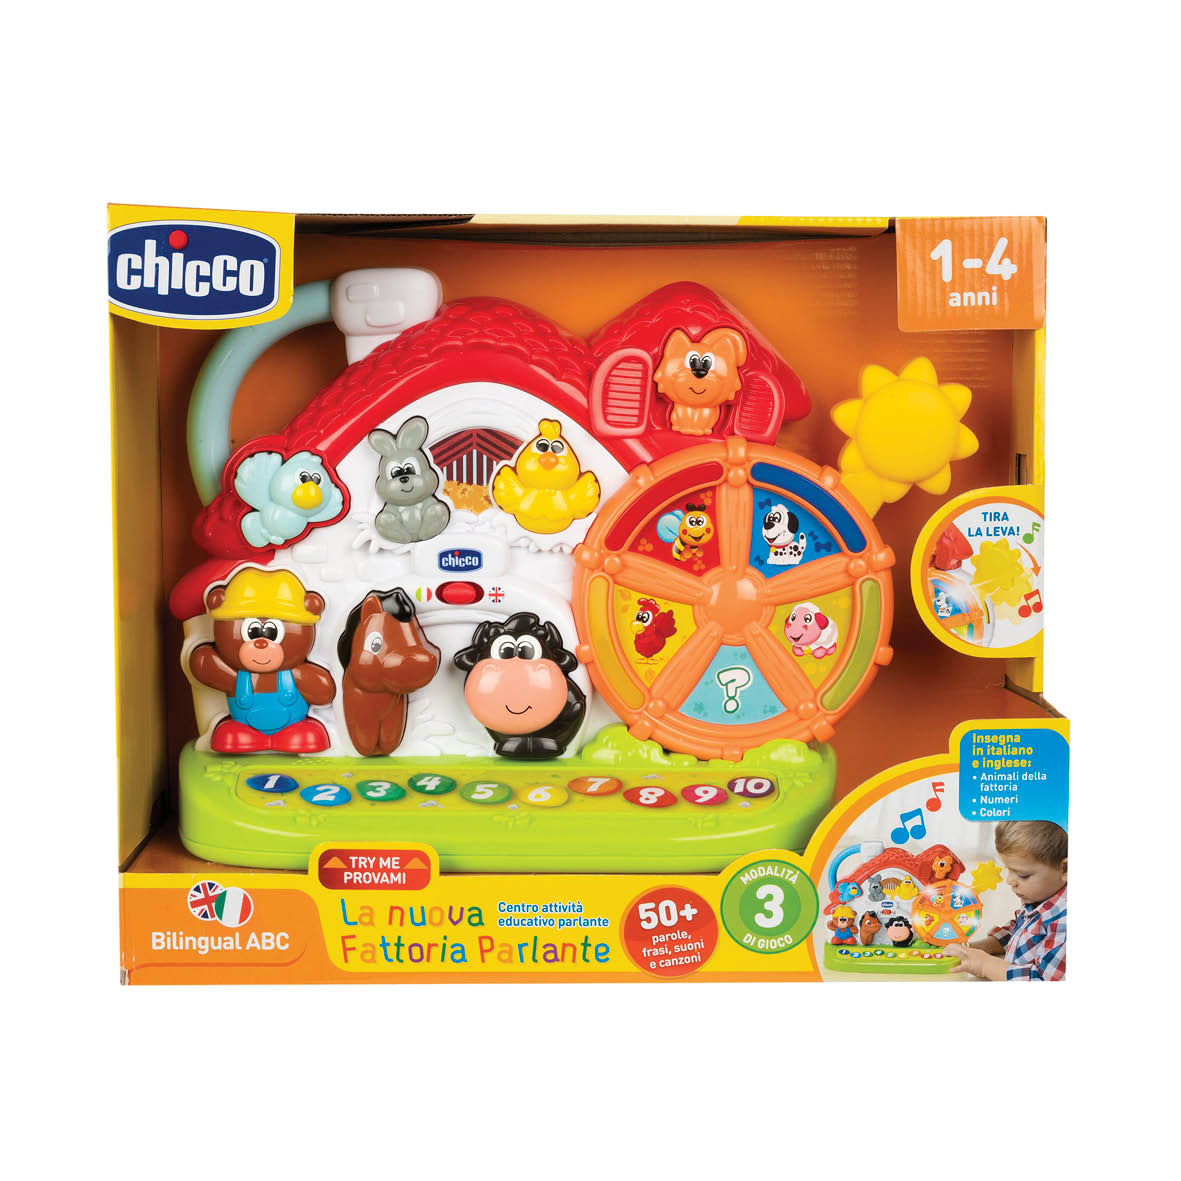 Chicco Talking Farm - What's Instore